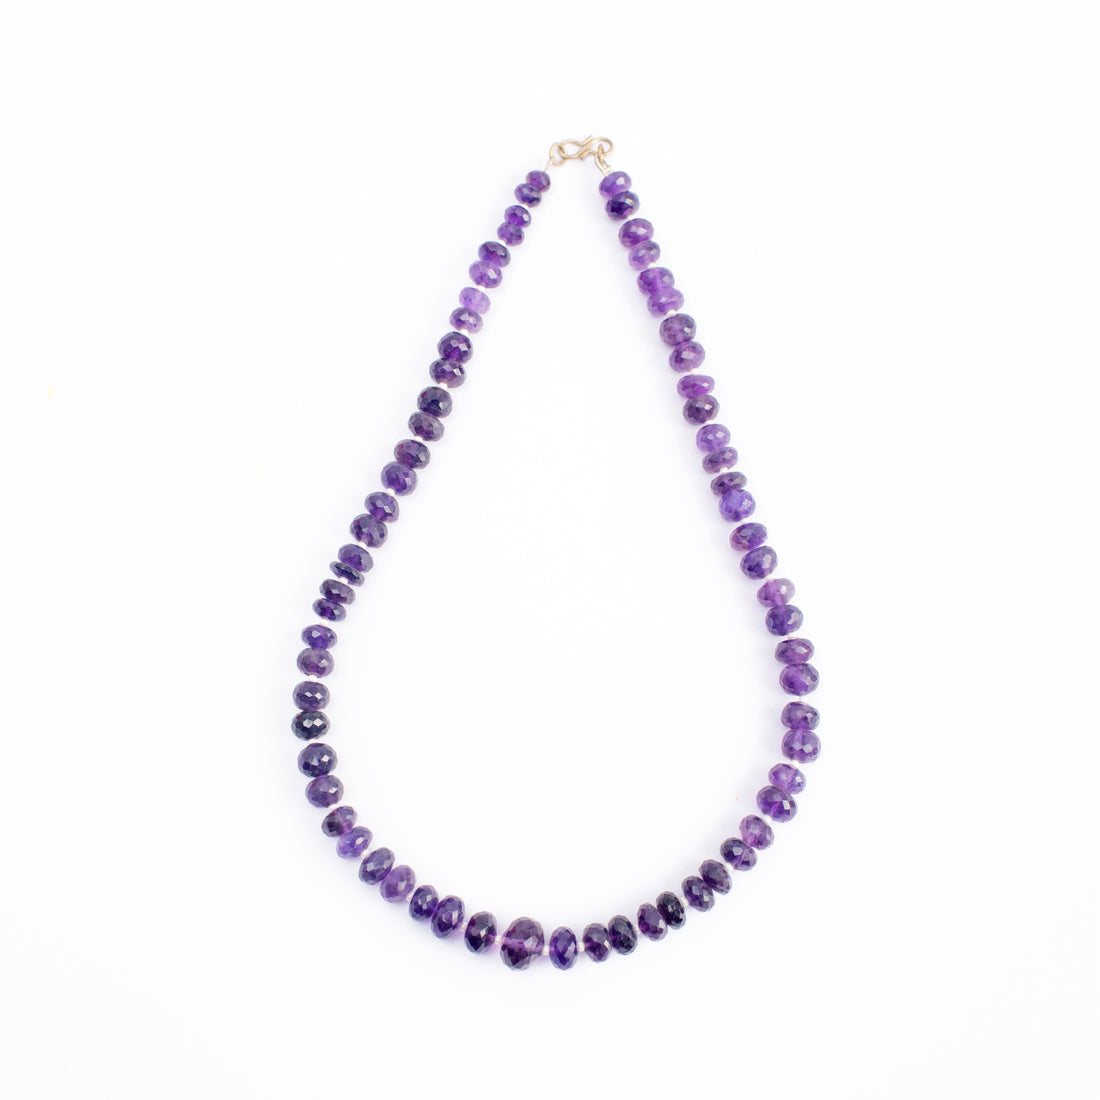 Amethyst with Pearls Necklace